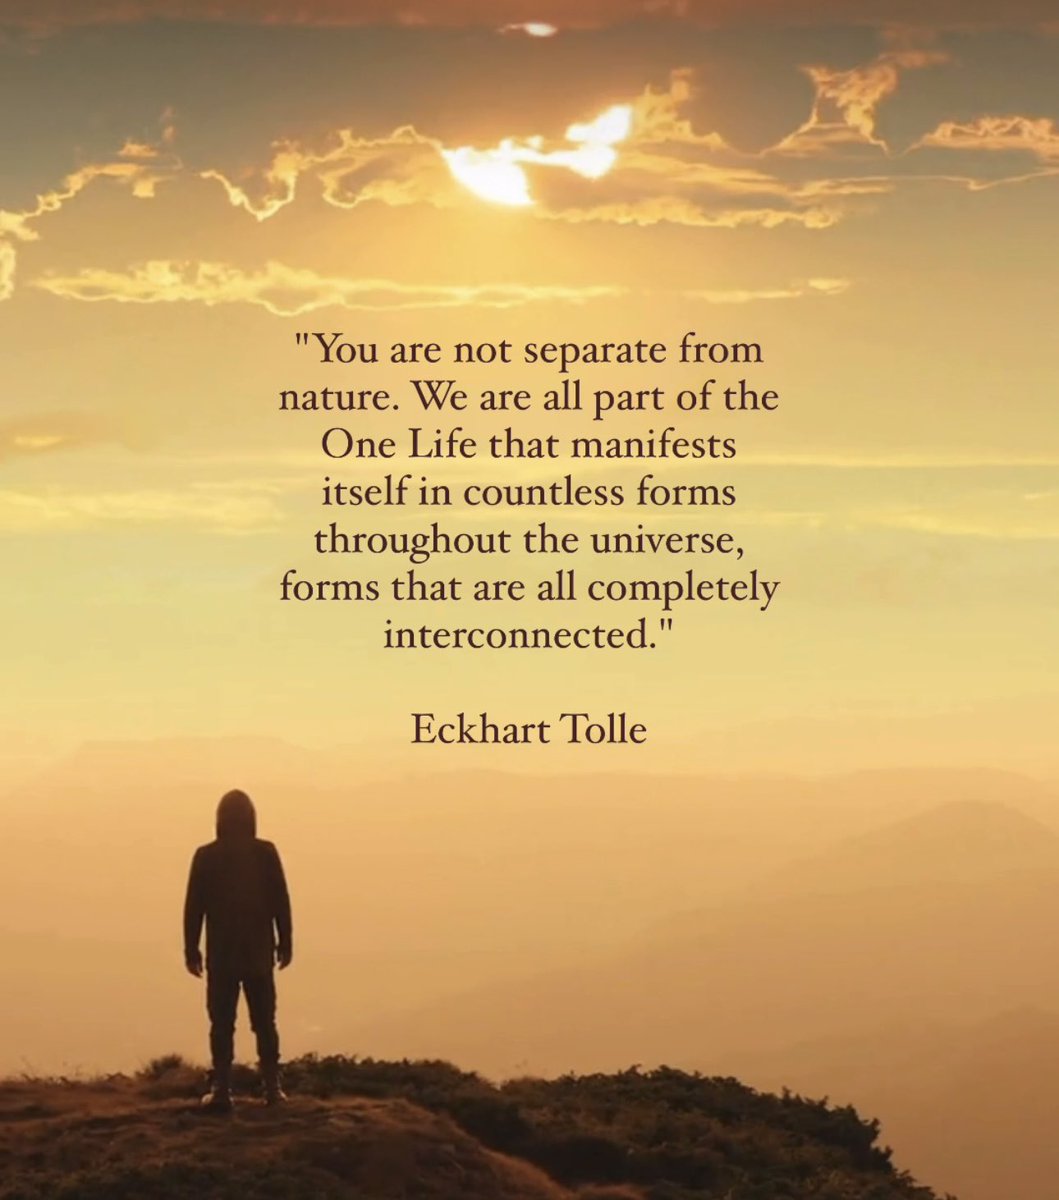 Wisdom by Eckhart Tolle. #nature #awareness #insight